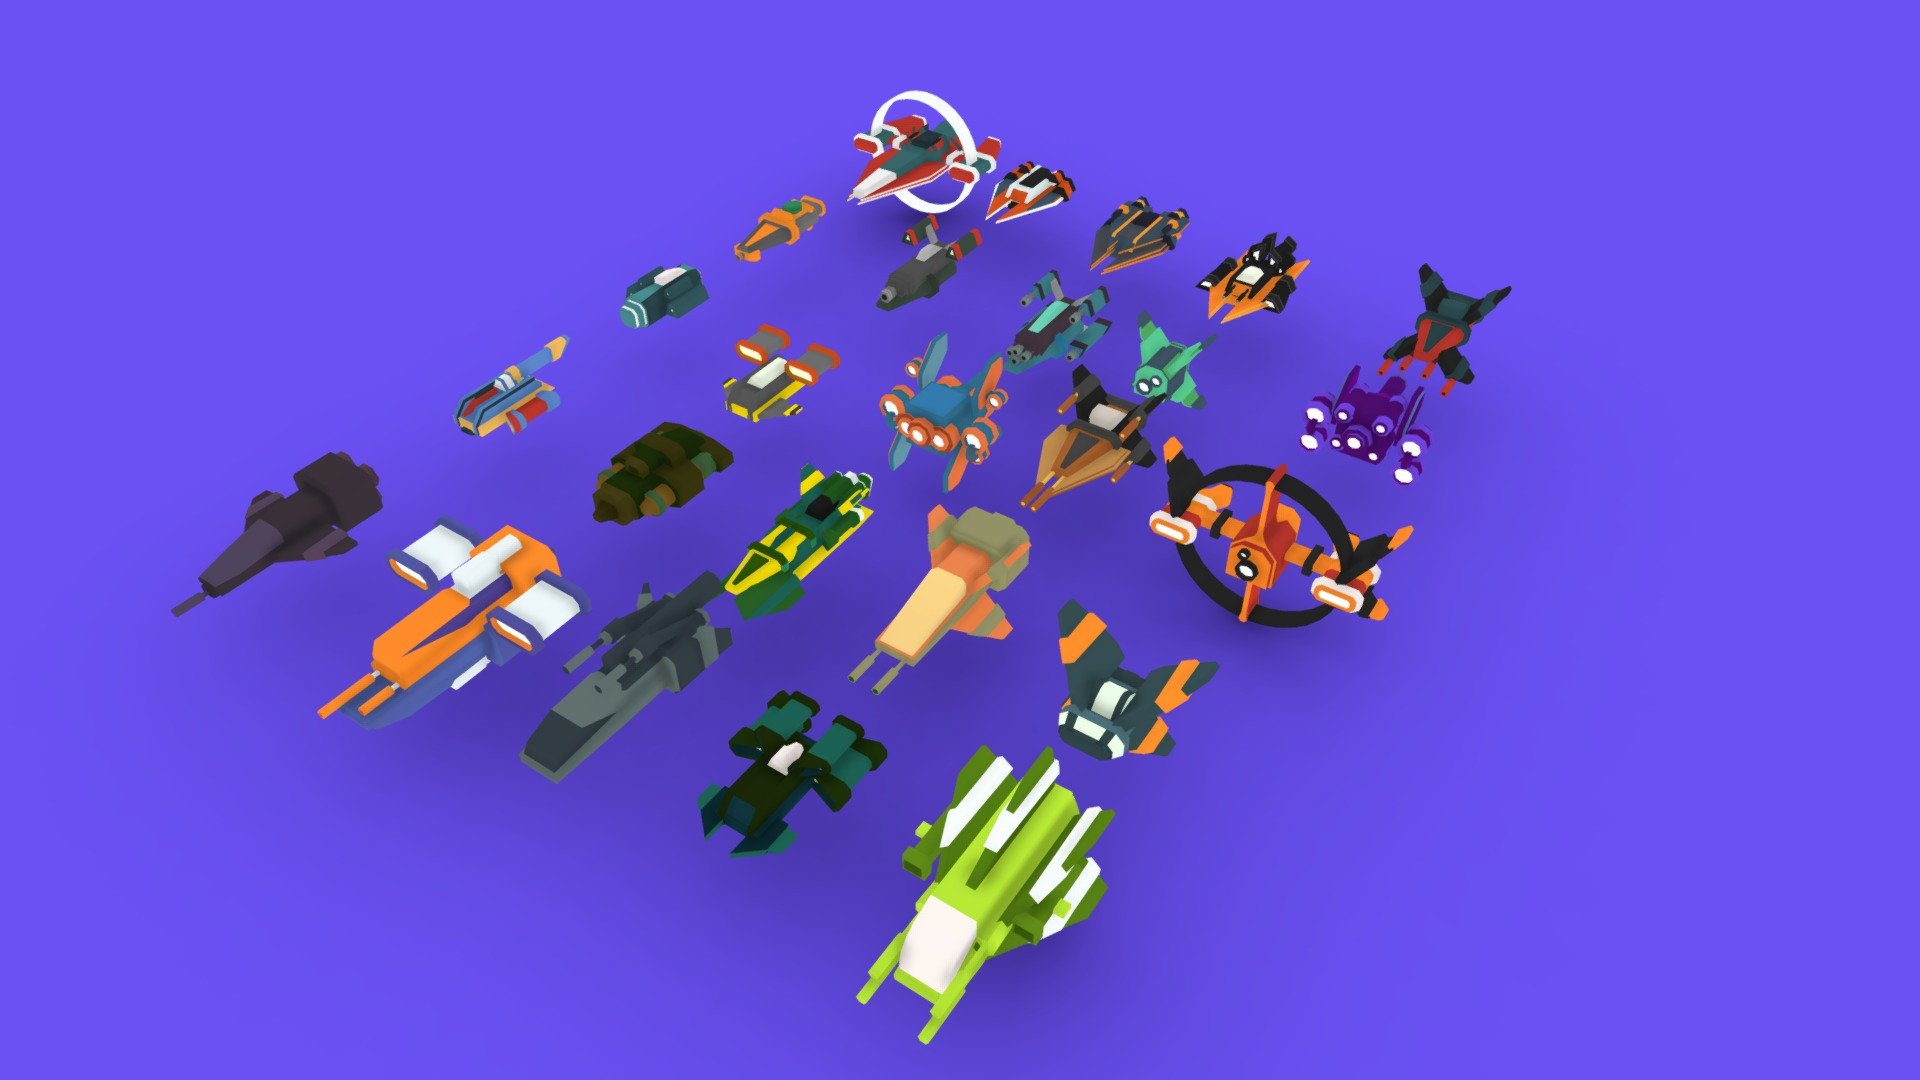 Shoot &lsquo;Em With Style

Asset pack containing 25 Science-Fiction Spaceships.
Format : .fbx 

Lowest Poly Count :  400

Highest Poly Count :2200

There are 2 materials - one for the base color &amp; the other one for the emission. Both use the same texture atlas 3d model